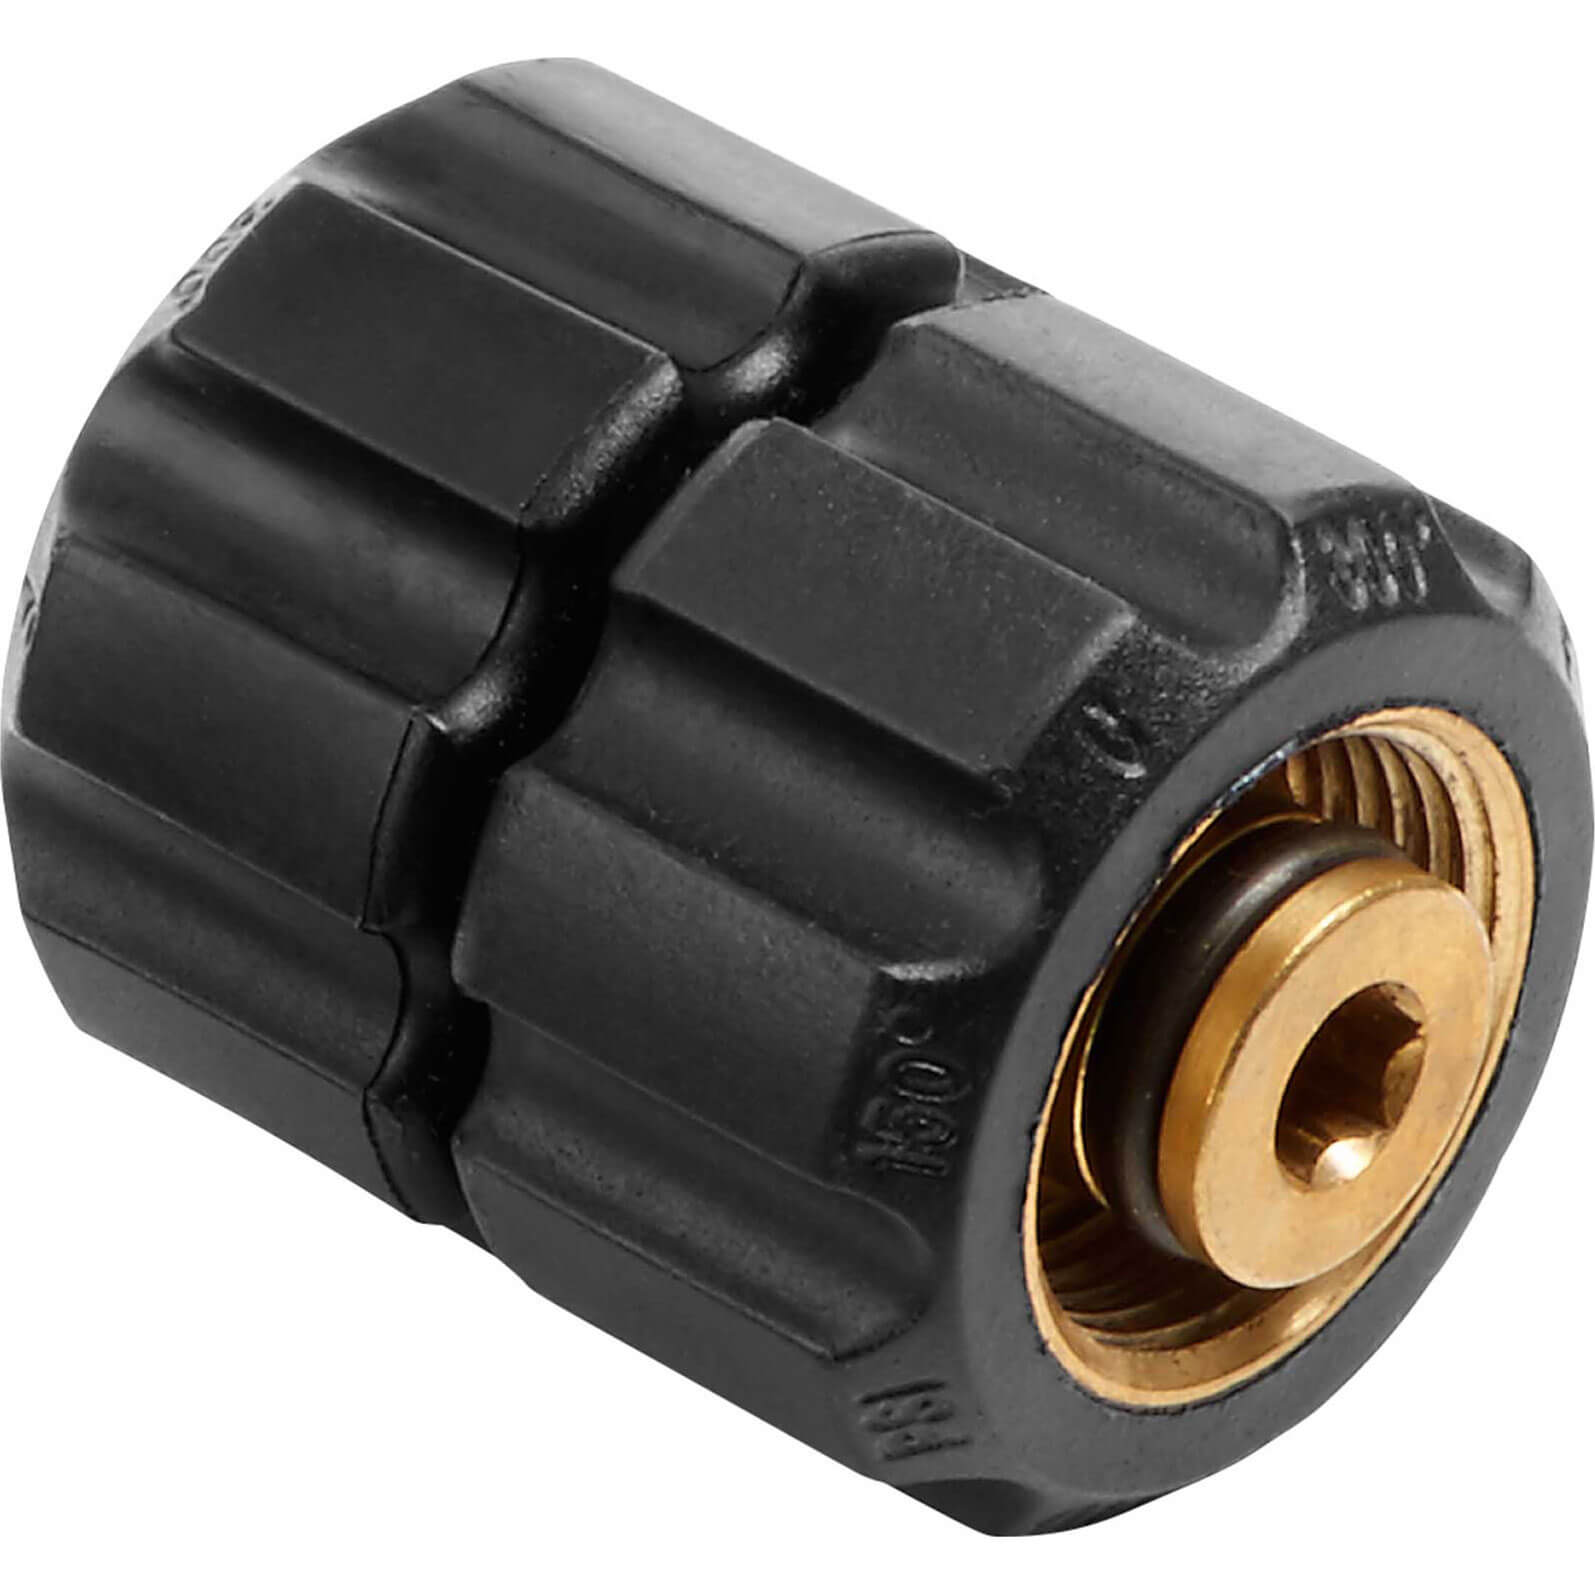 Photo of Bosch Adaptor For Ghp 5-14 C- 5-14 And 6-14 Pressure Washers